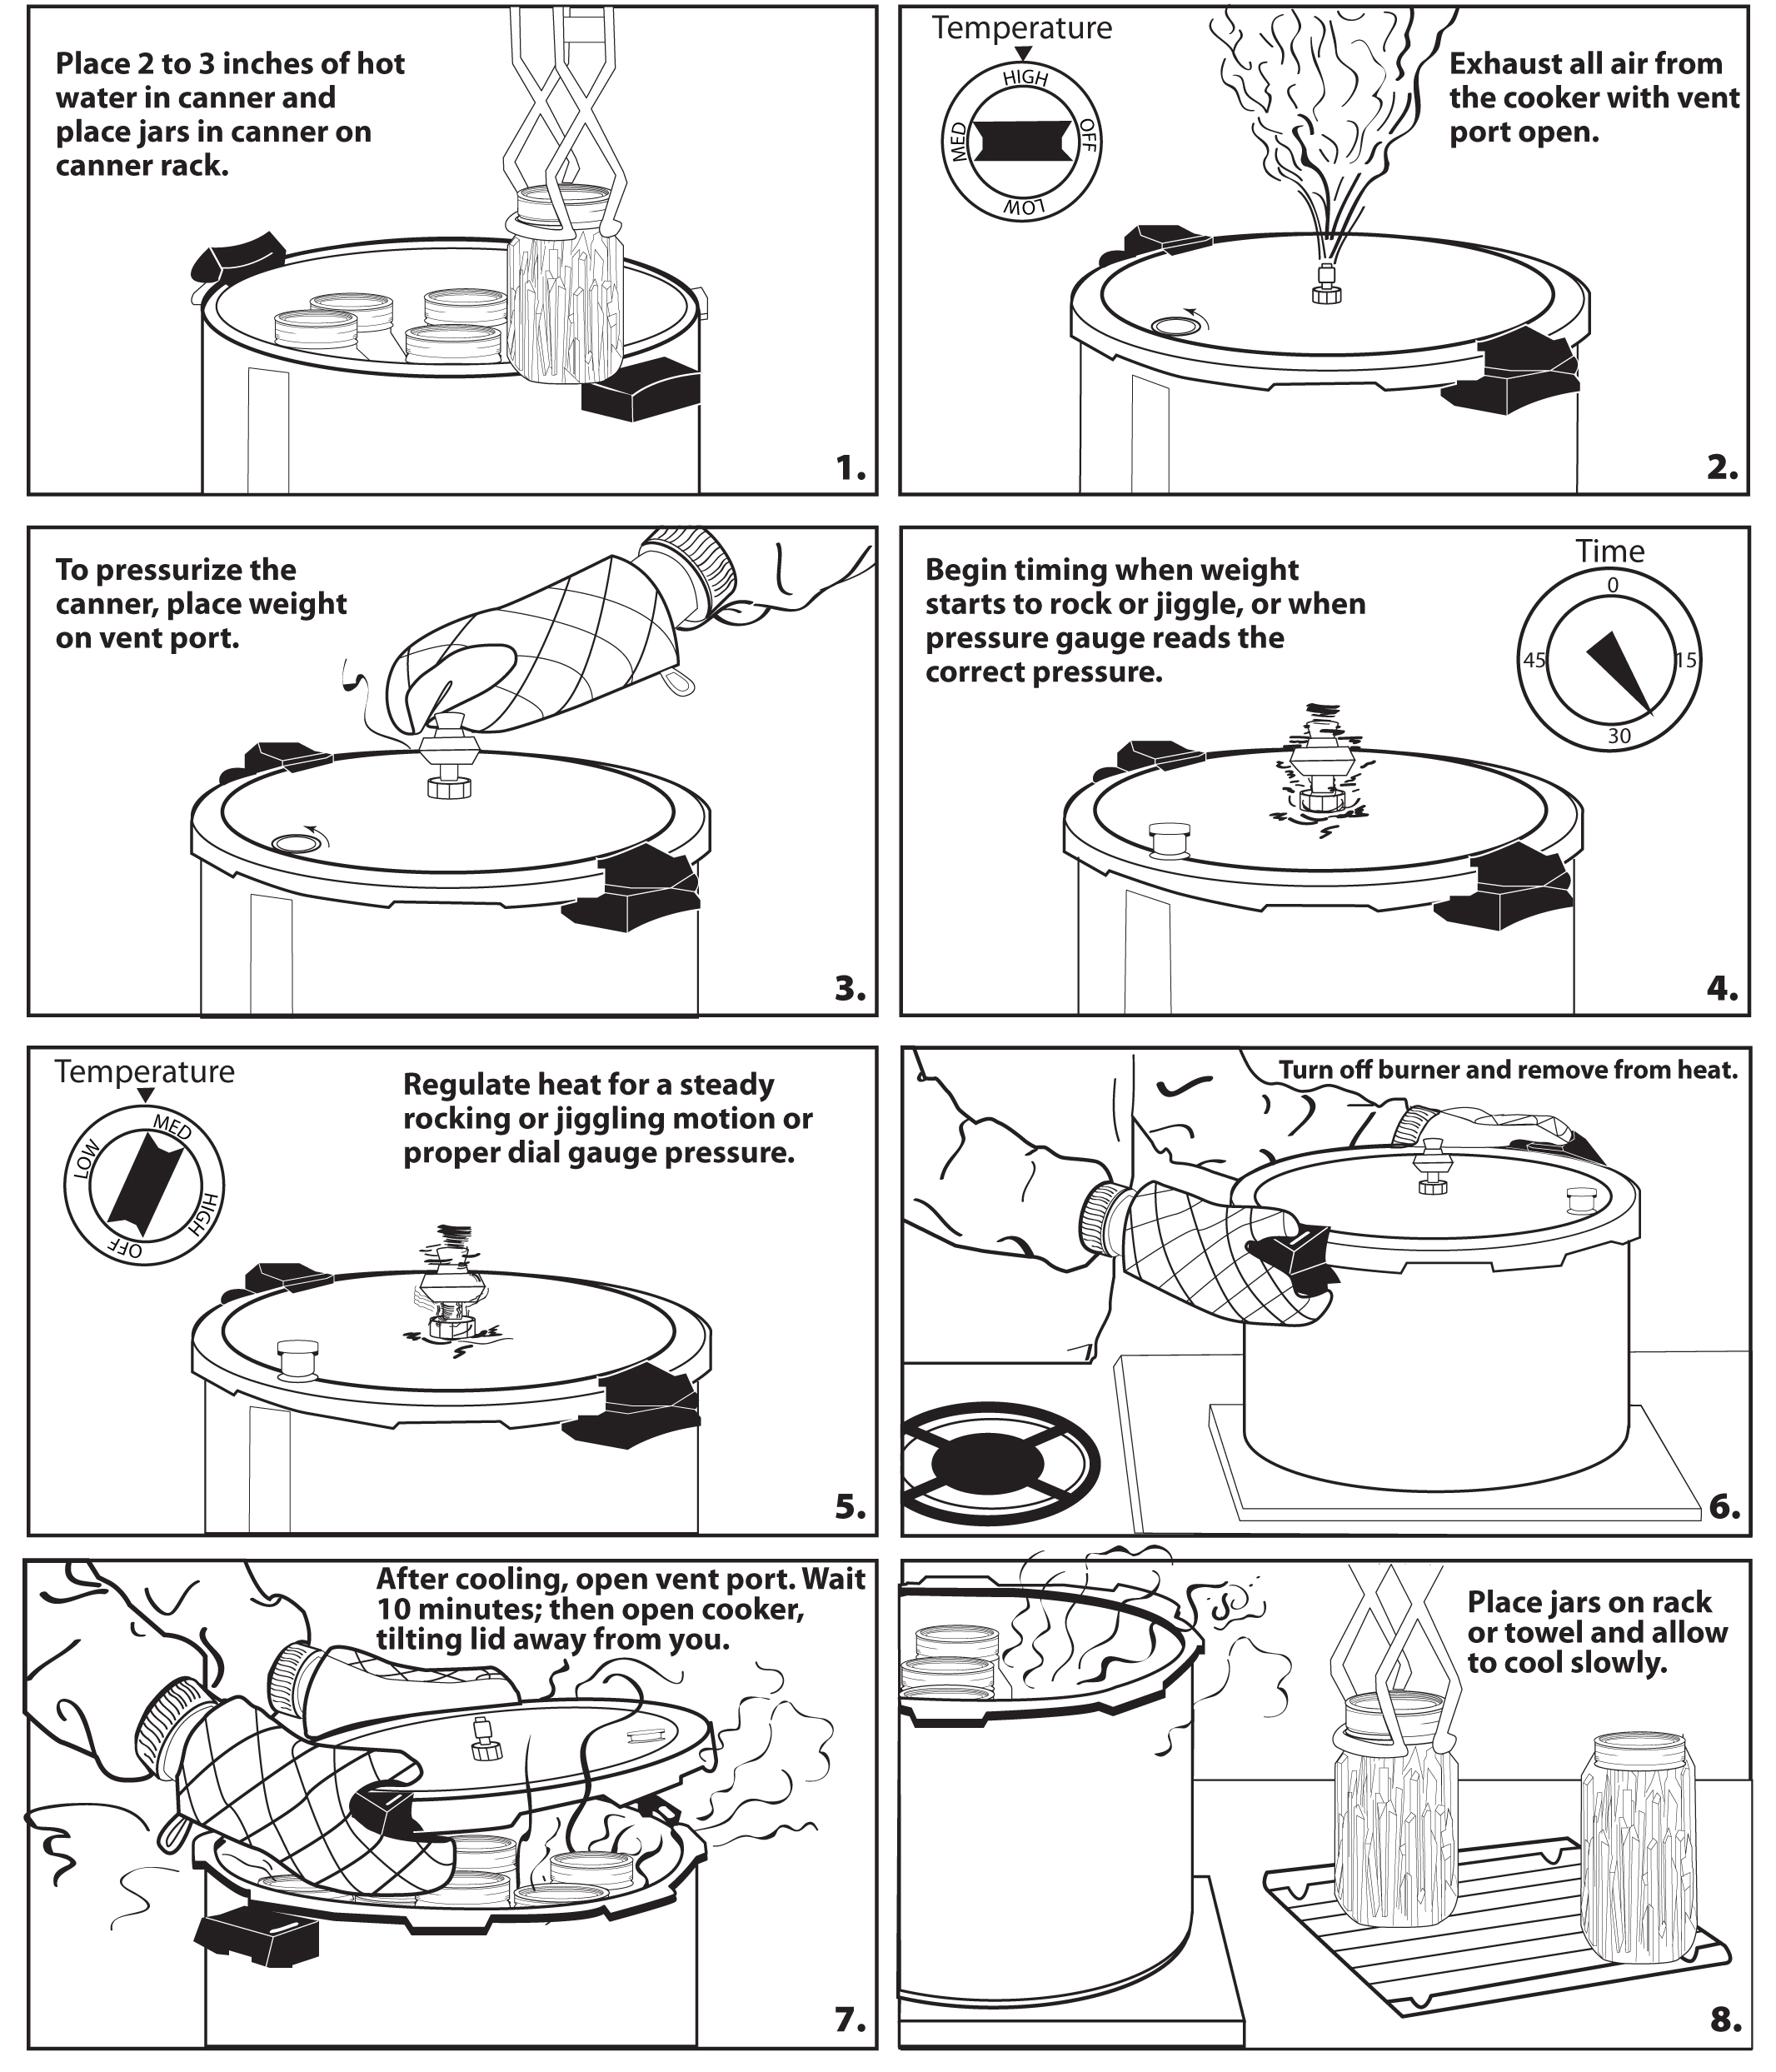 Illustration showing procedure for processing canning jars using a pressure canner.